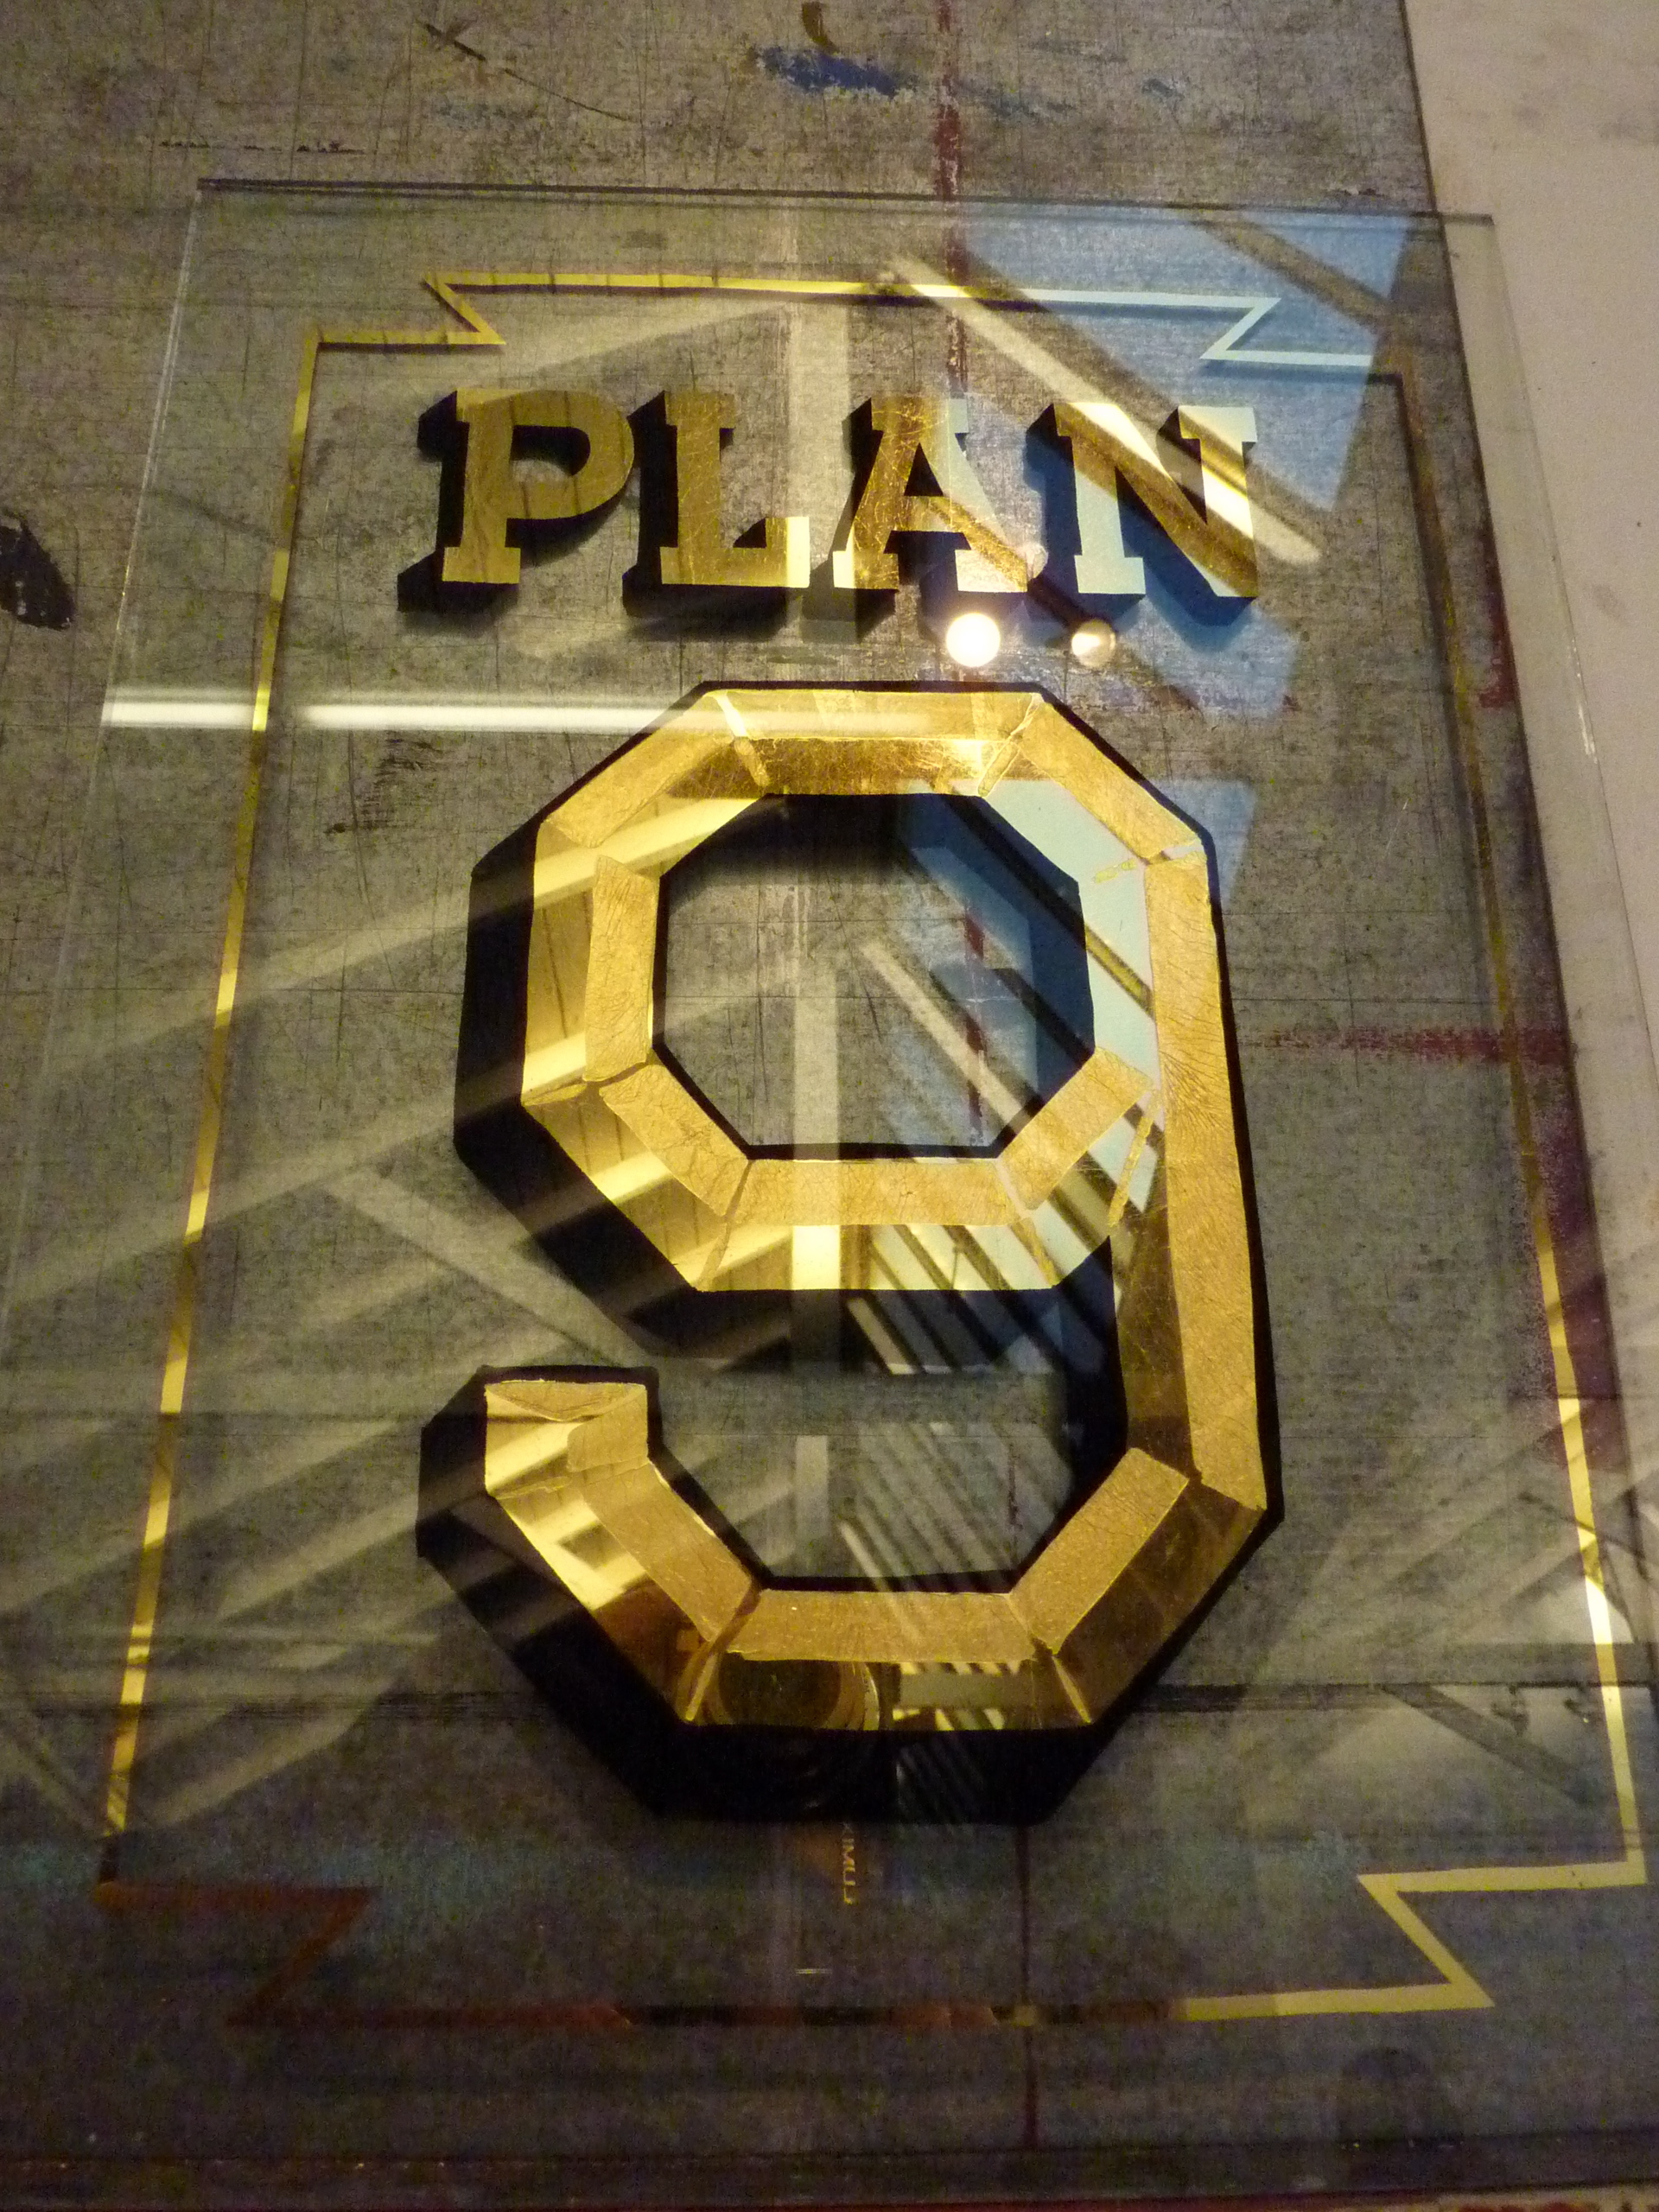 GOLD-plan-9-completed-in-the-evening-light-gilding-demo-guerrero-gallery-30-june-2011_5892528720_o.jpg